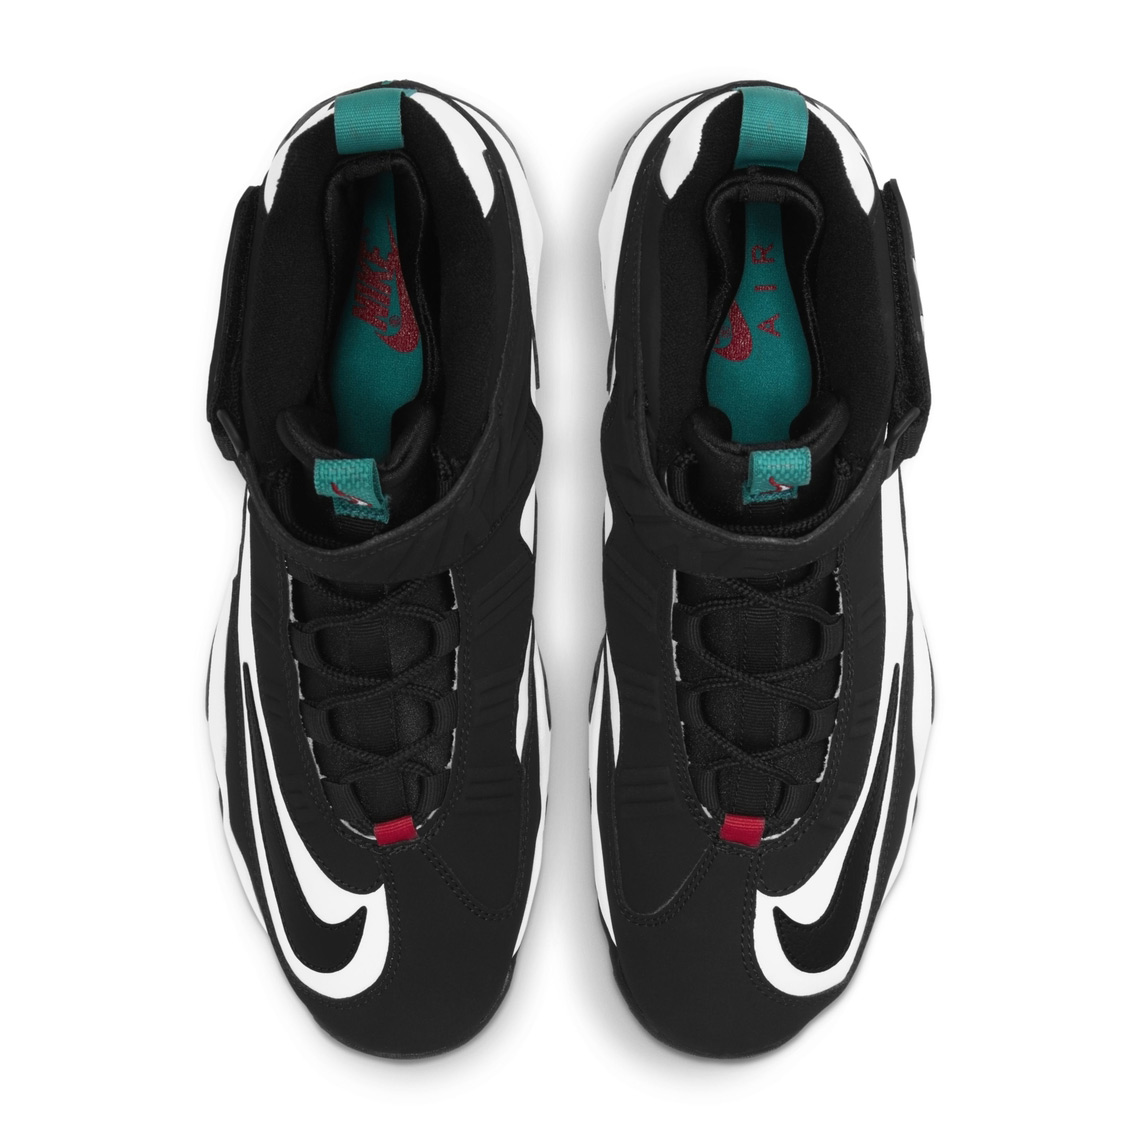 Nike Air Griffey Max 1 2021 Release Date 2